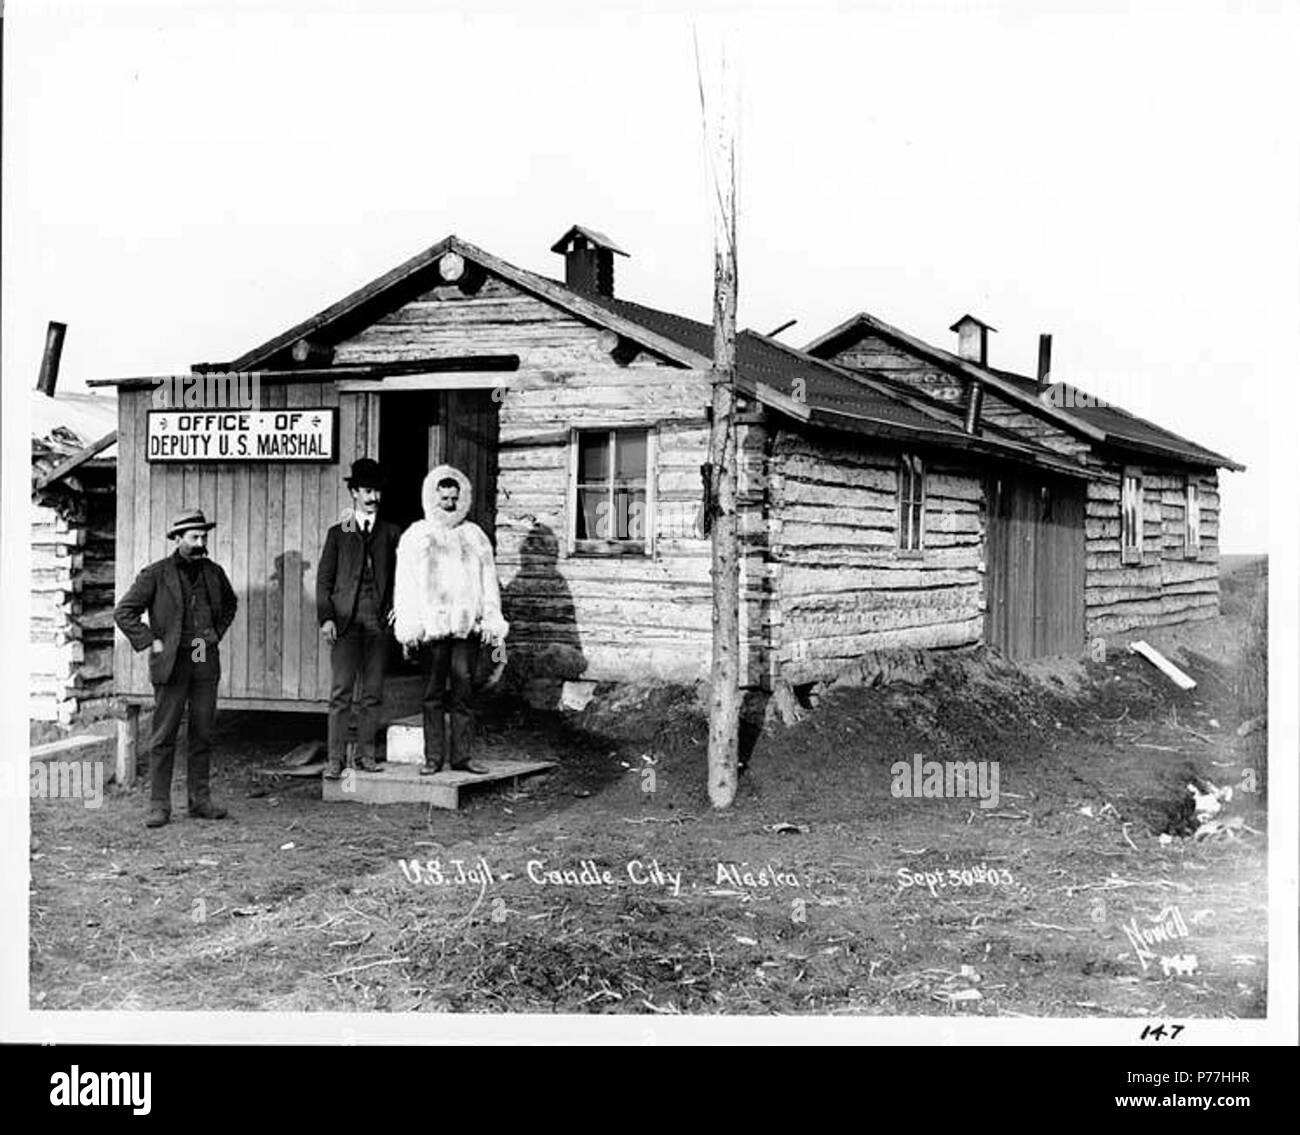 . English: Jail and office of the U.S. Deputy Marshall, Candle City, September 30, 1903 . English: Caption on image: U.S. Jail, Candle City, Alaska. Sept. 30th 03. Nowell 147. Subjects (LCTGM): Jails--Alaska--Candle; Law enforcement officers--Alaska--Candle; Log buildings--Alaska--Candle; Fur garments Subjects (LCSH): Marshalls--Alaska--Candle; Parkas--Alaska--Candle  . September 1903 6 Jail and office of the US Deputy Marshall, Candle City, September 30, 1903 (NOWELL 41) Stock Photo